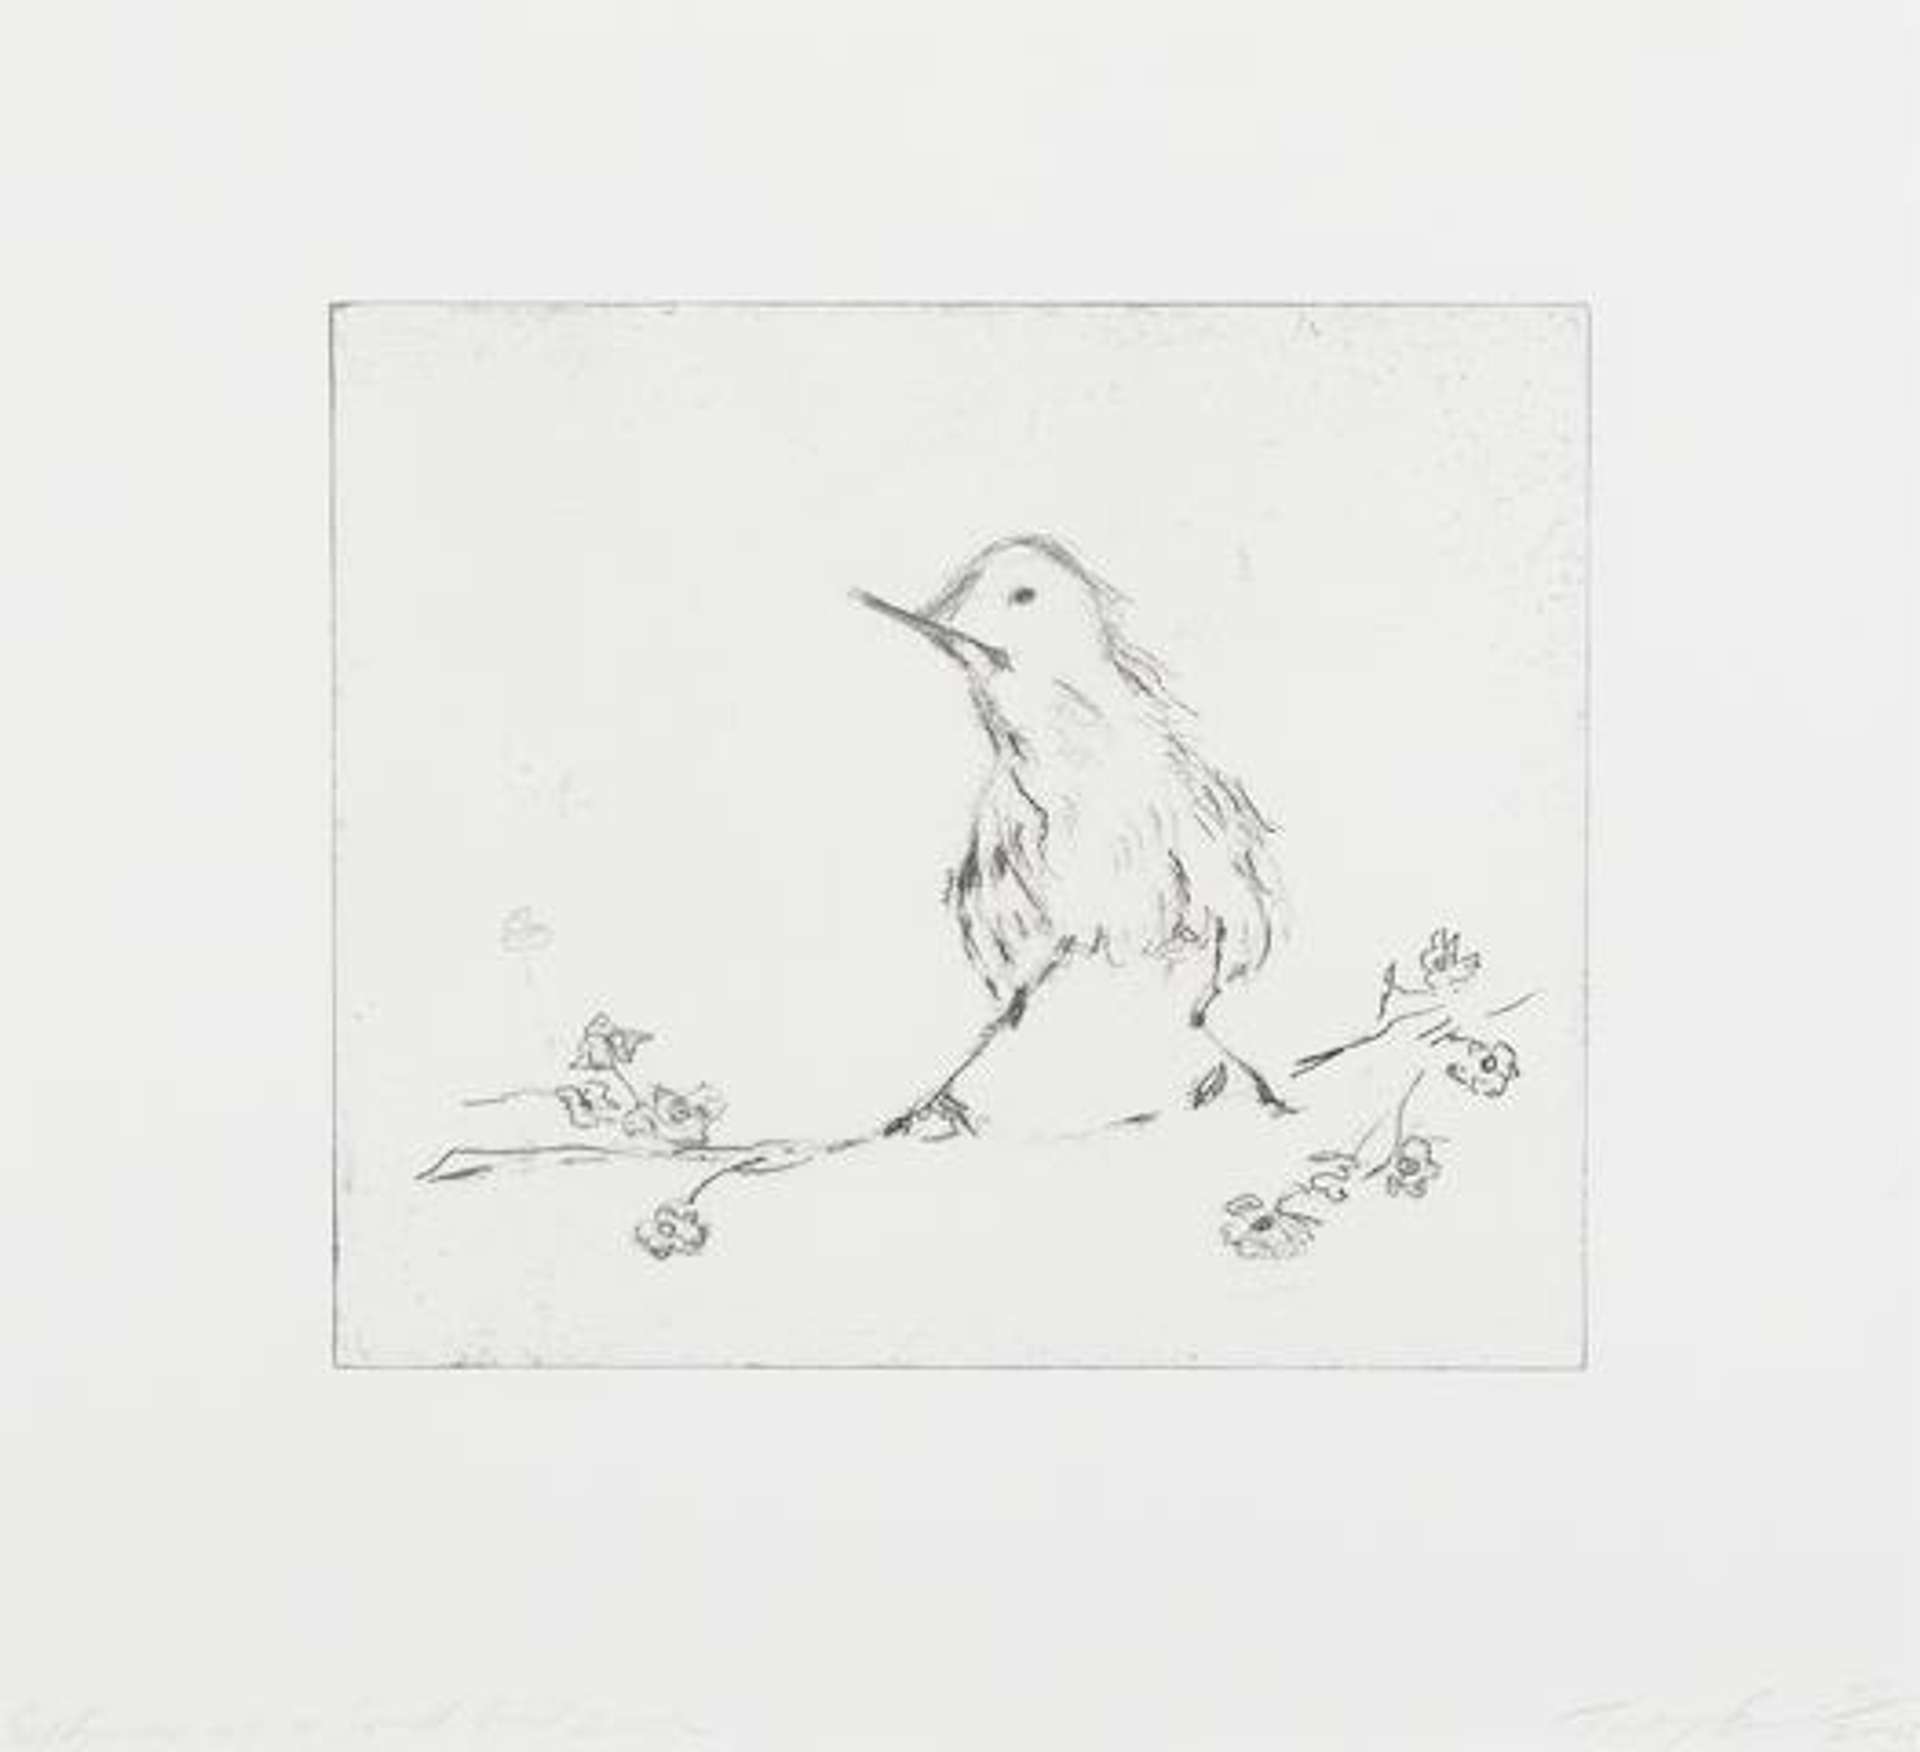 Tracey Emin: Self-Portrait As A Small Bird - Signed Print